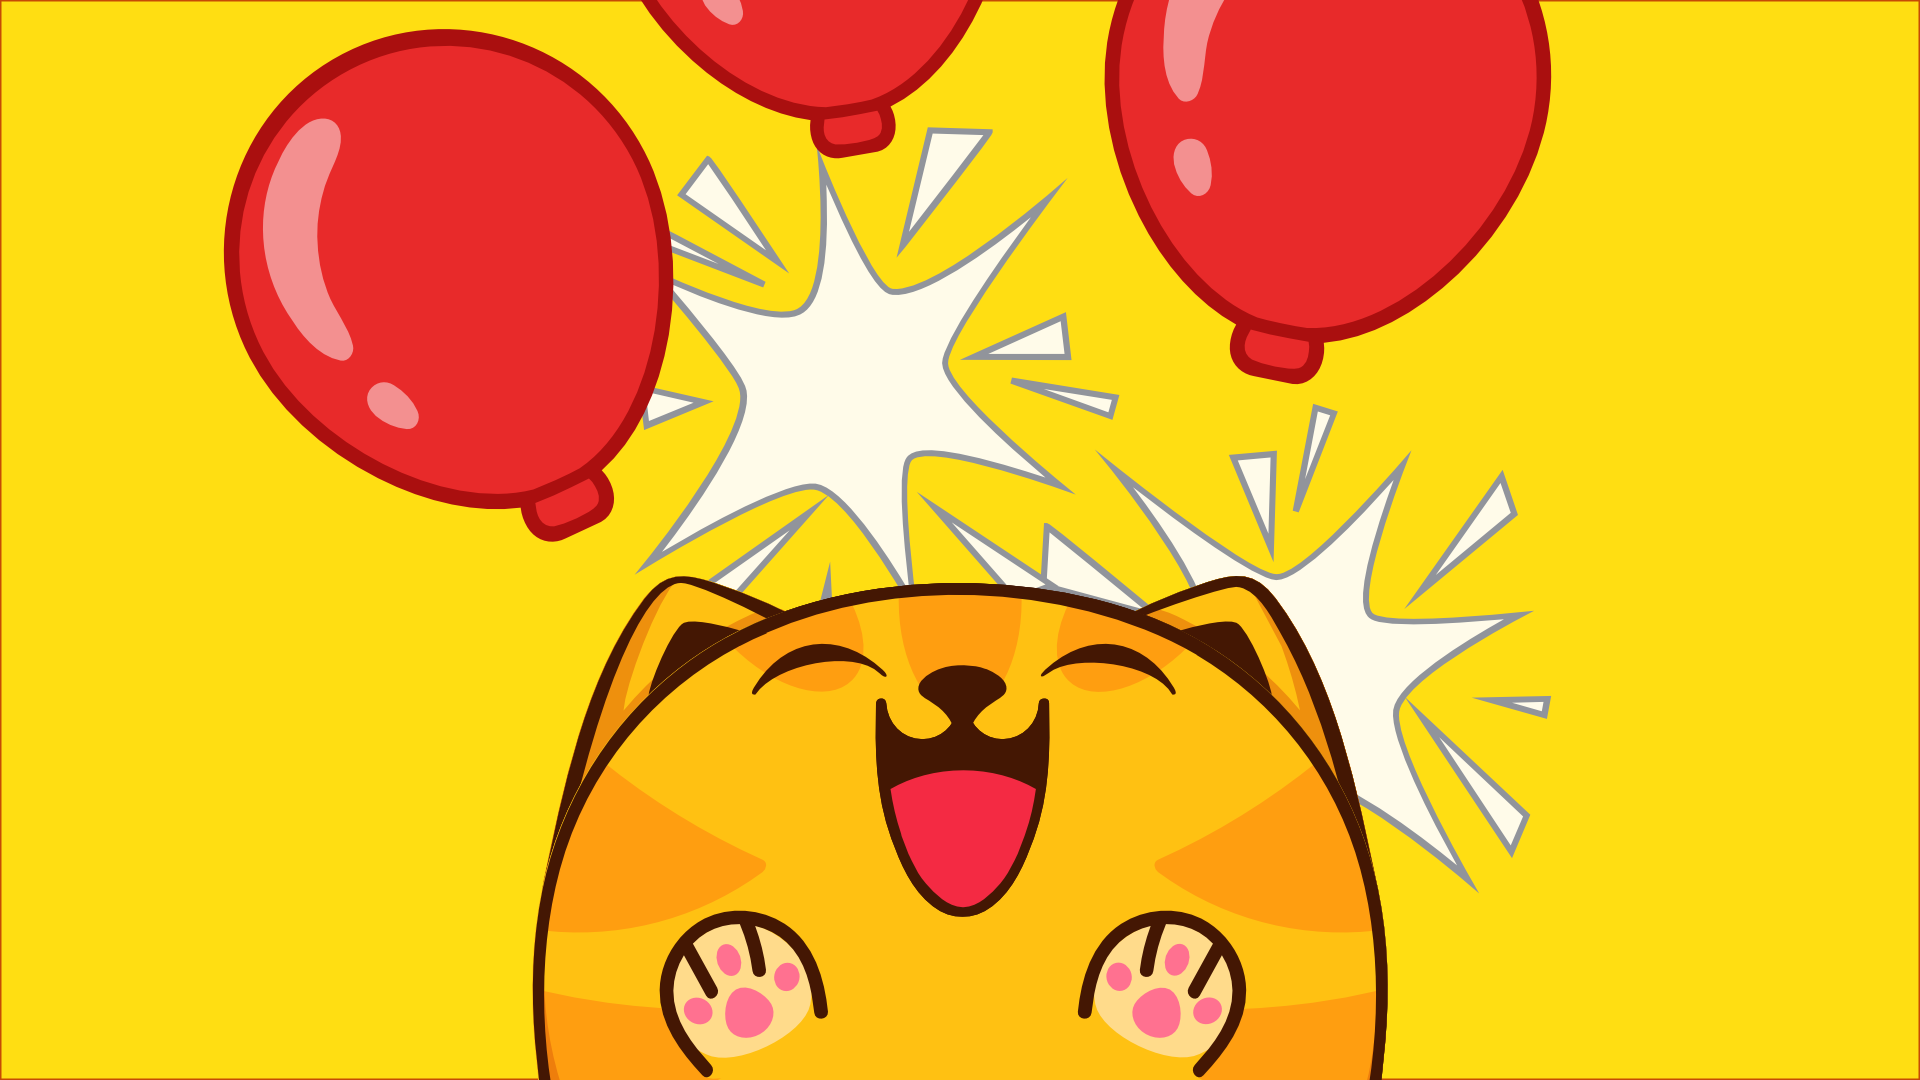 PUFFY CAT - Play Online for Free!